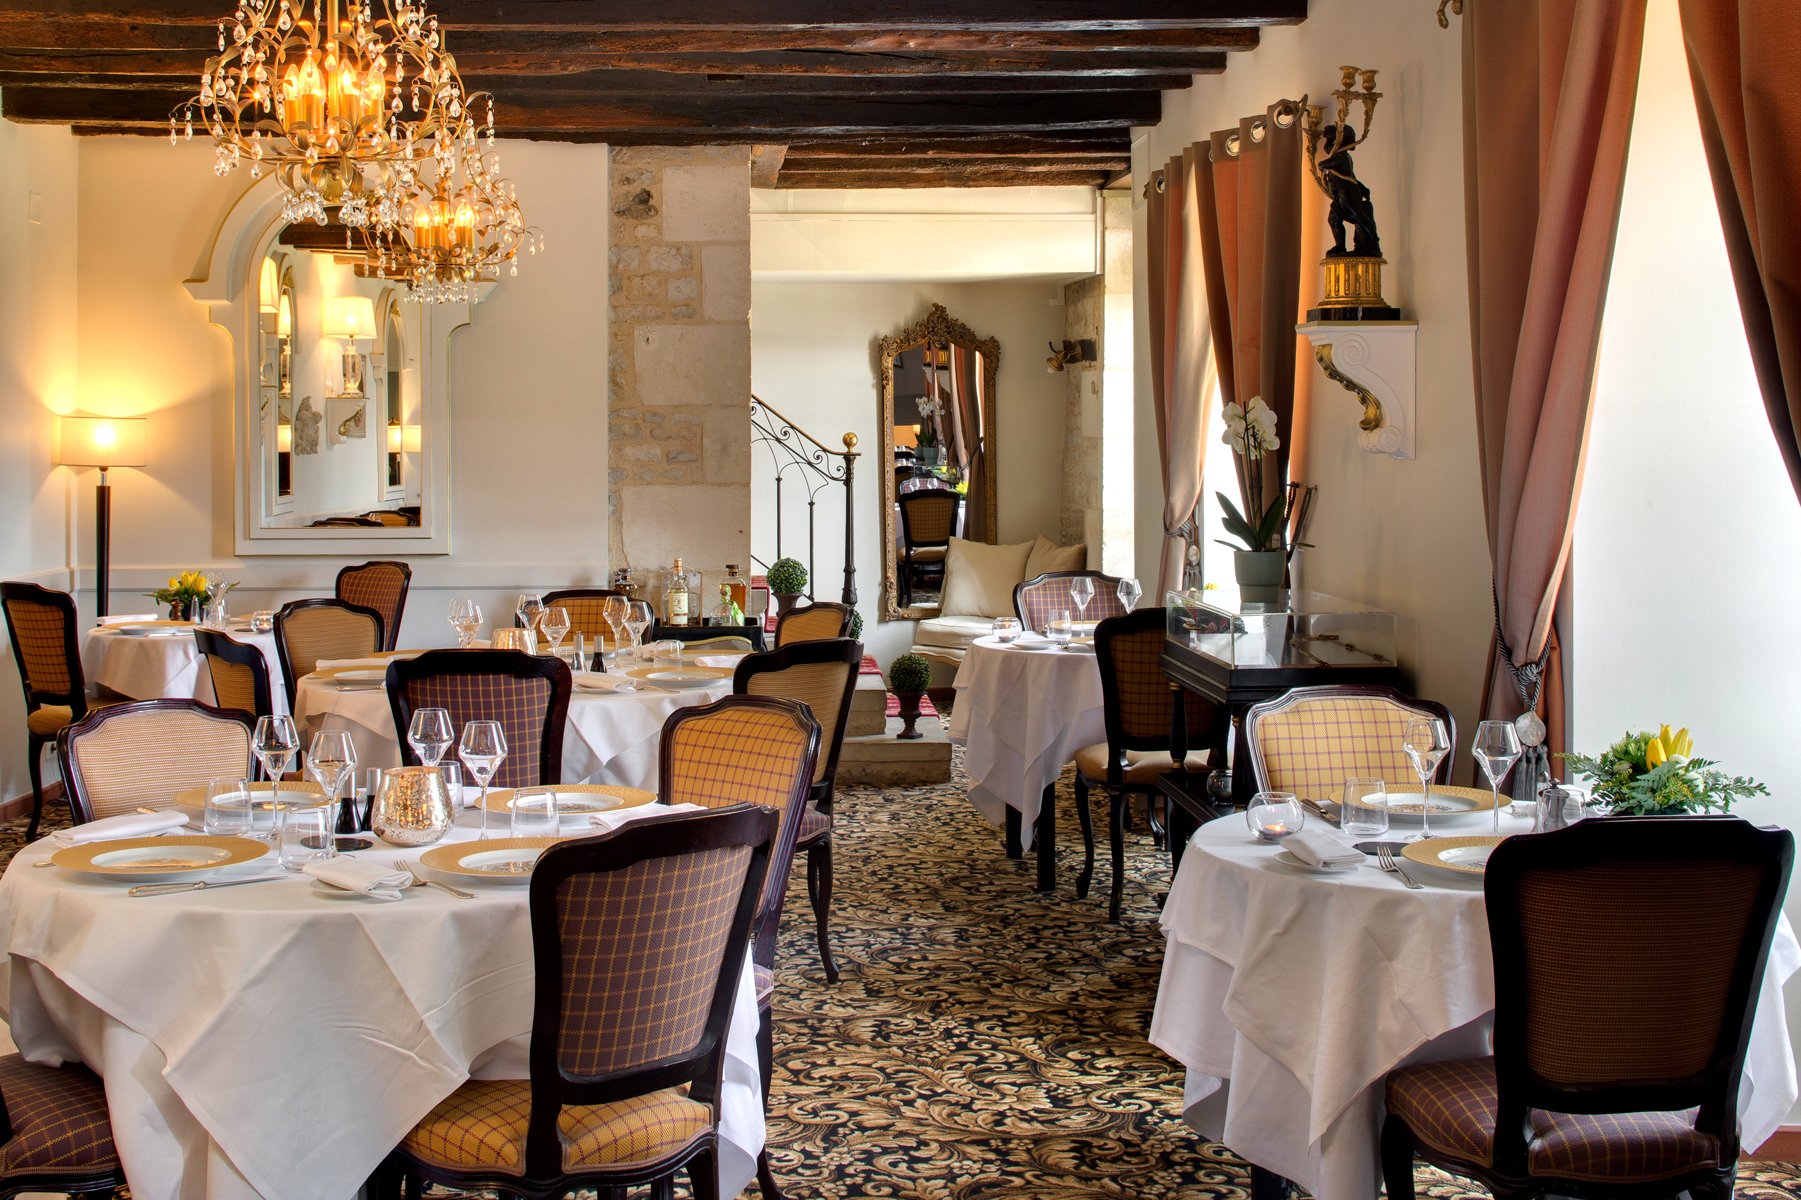 Hôtel Saint-Martin | In Nouvelle Aquitaine, 20 minutes from Niort, France | Weddings & Events